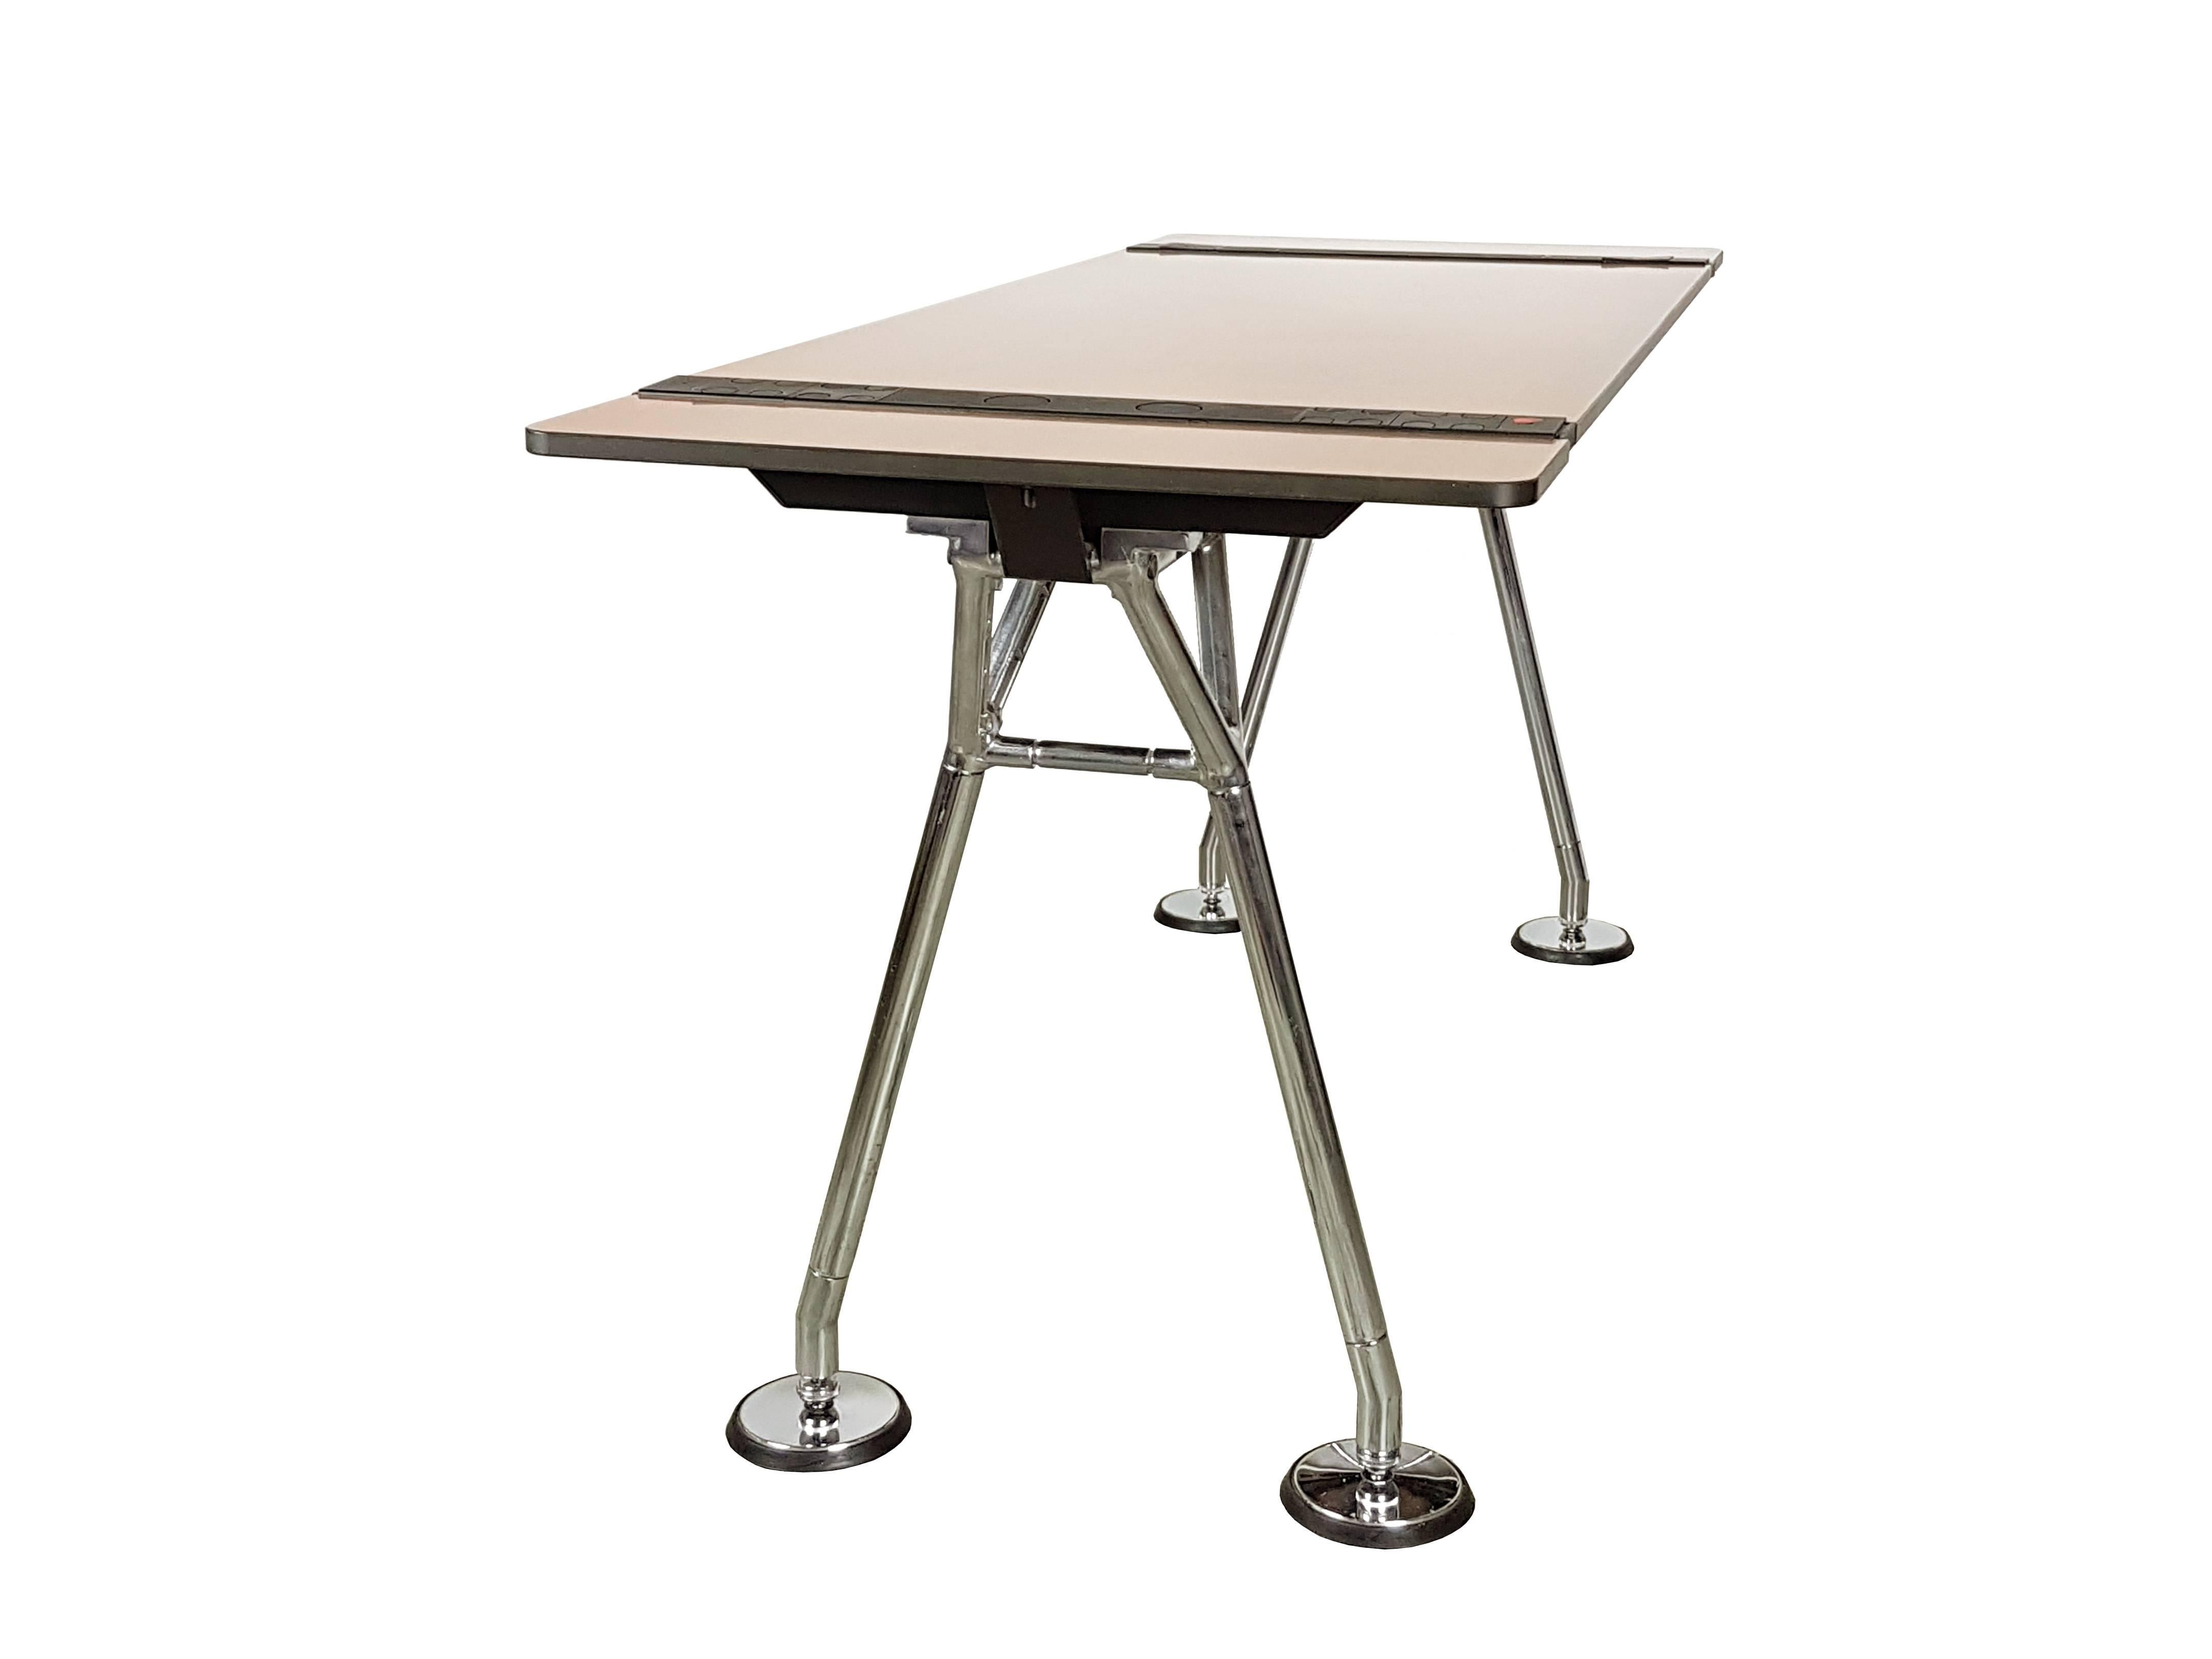 This desk was designed by Sir Norman Foster and produced in Italy by Tecno in 1987. The solid laminated top in a faux bois (fake wood) version, stands on a chromed metal frame with rubber adjustable feet. Its top features black caps to hide and tidy